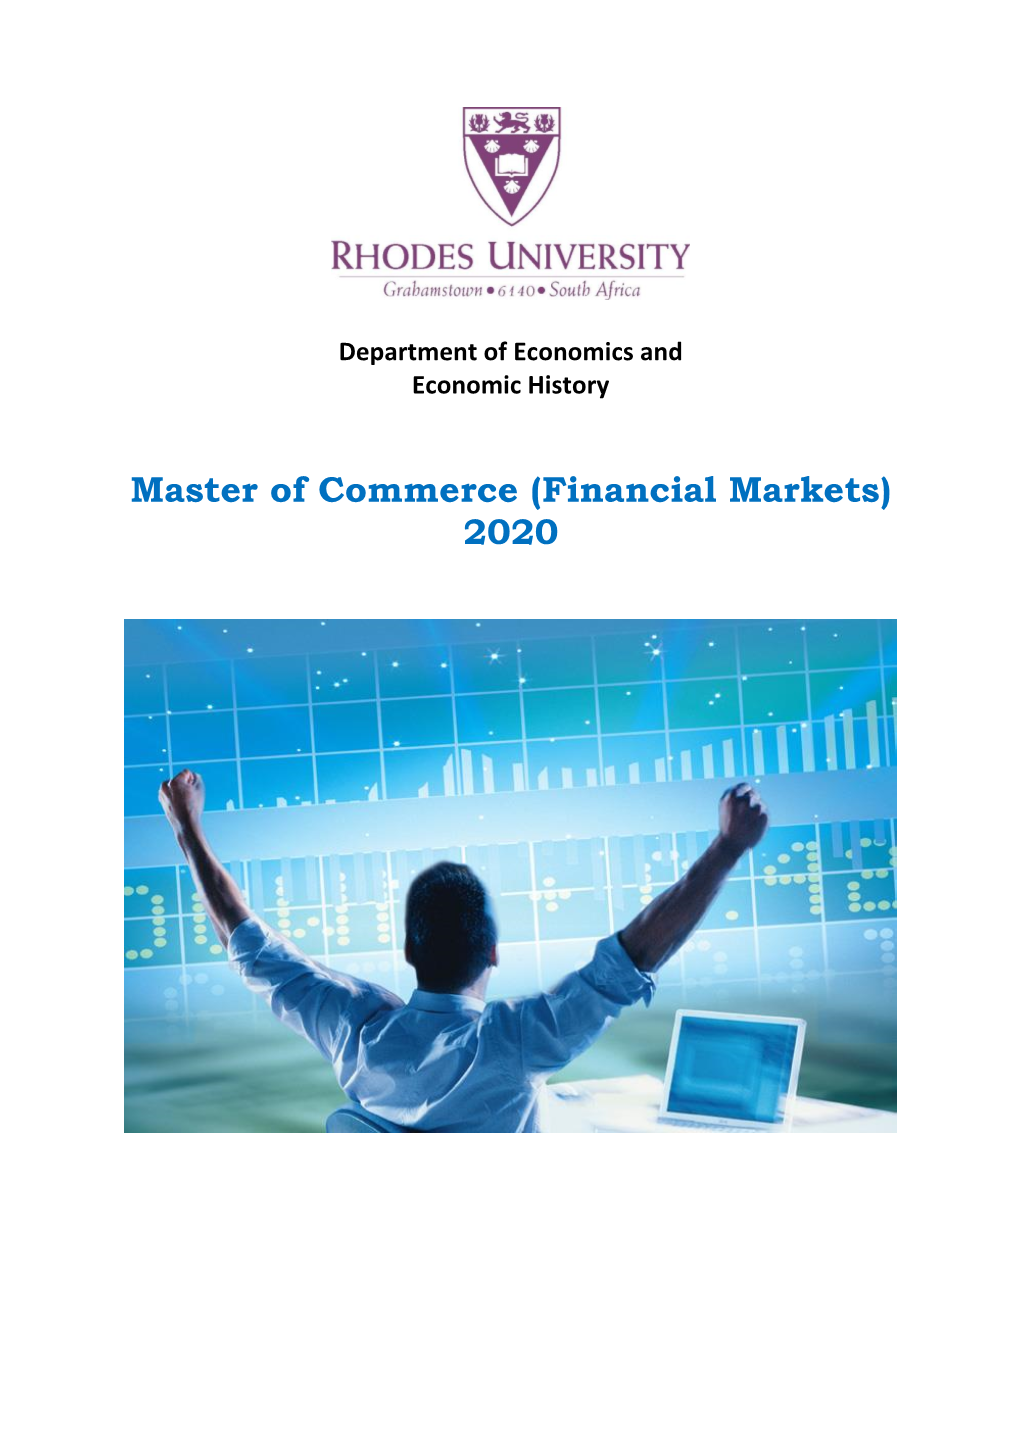 Master of Commerce (Financial Markets) 2020